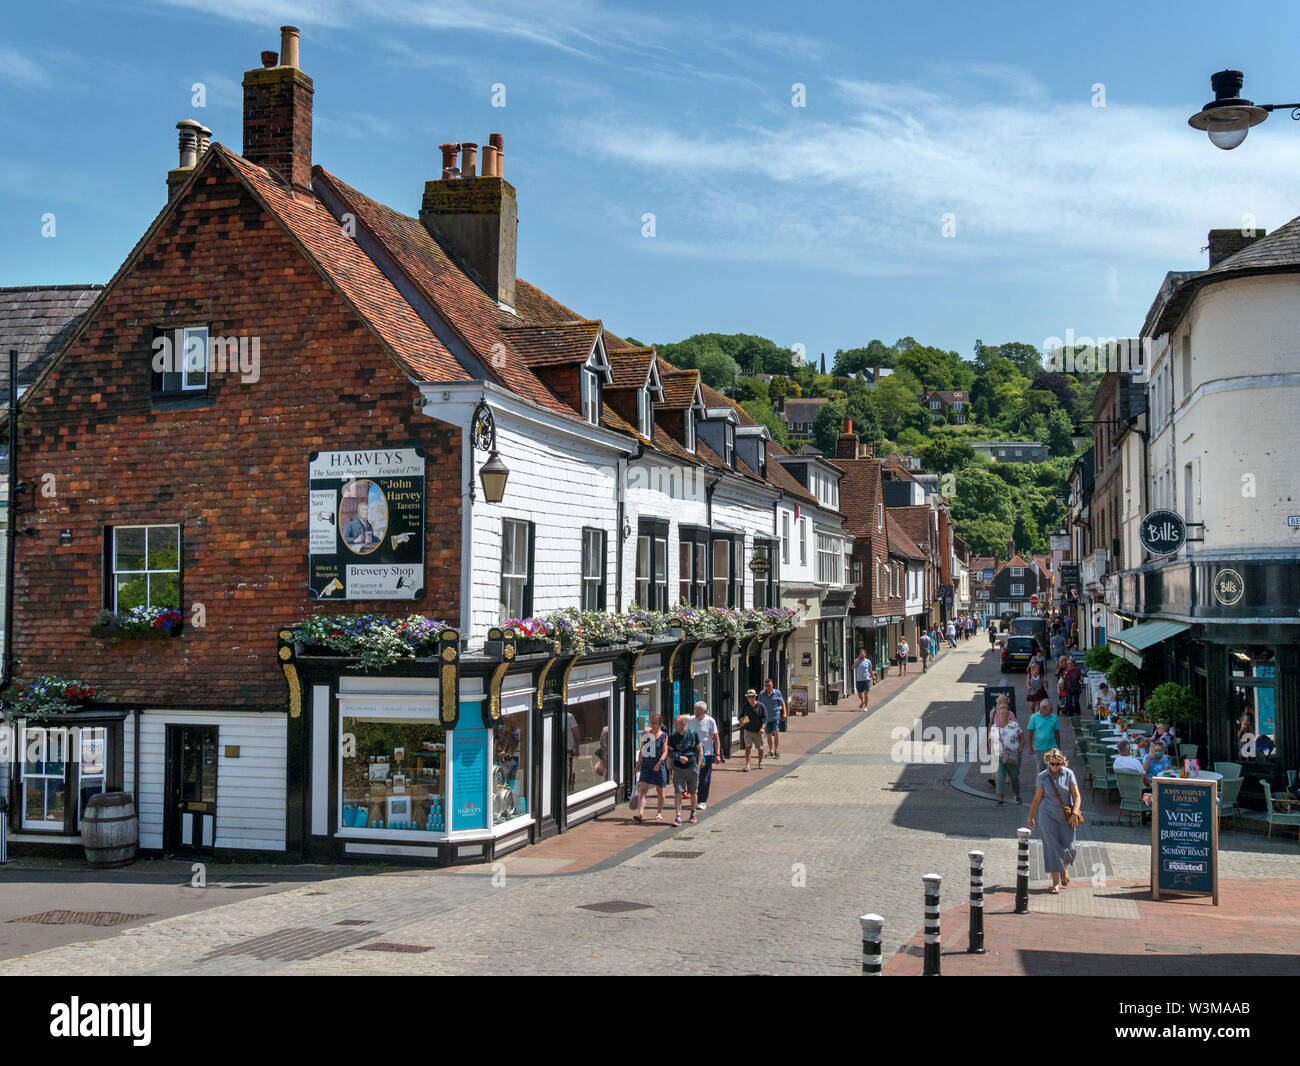 Pedestrianised Cliffe High Street with shops and shoppers on a sunny day in Summer, Lewes, East Sussex, England, UK Stock Photo